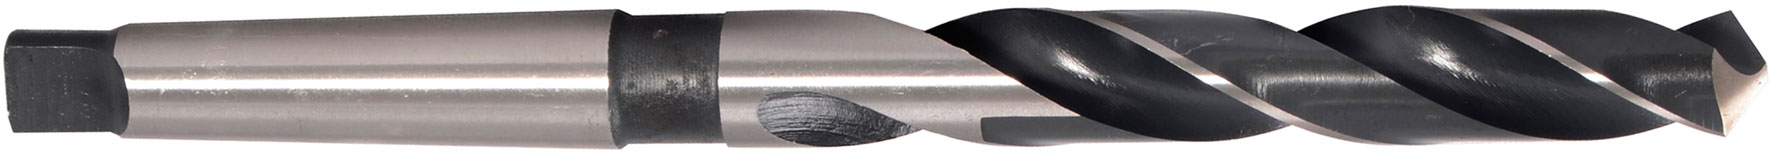 HSS twist drill bit DIN 345, with morse taper shank HSS-G DIN 345 type N - grounded